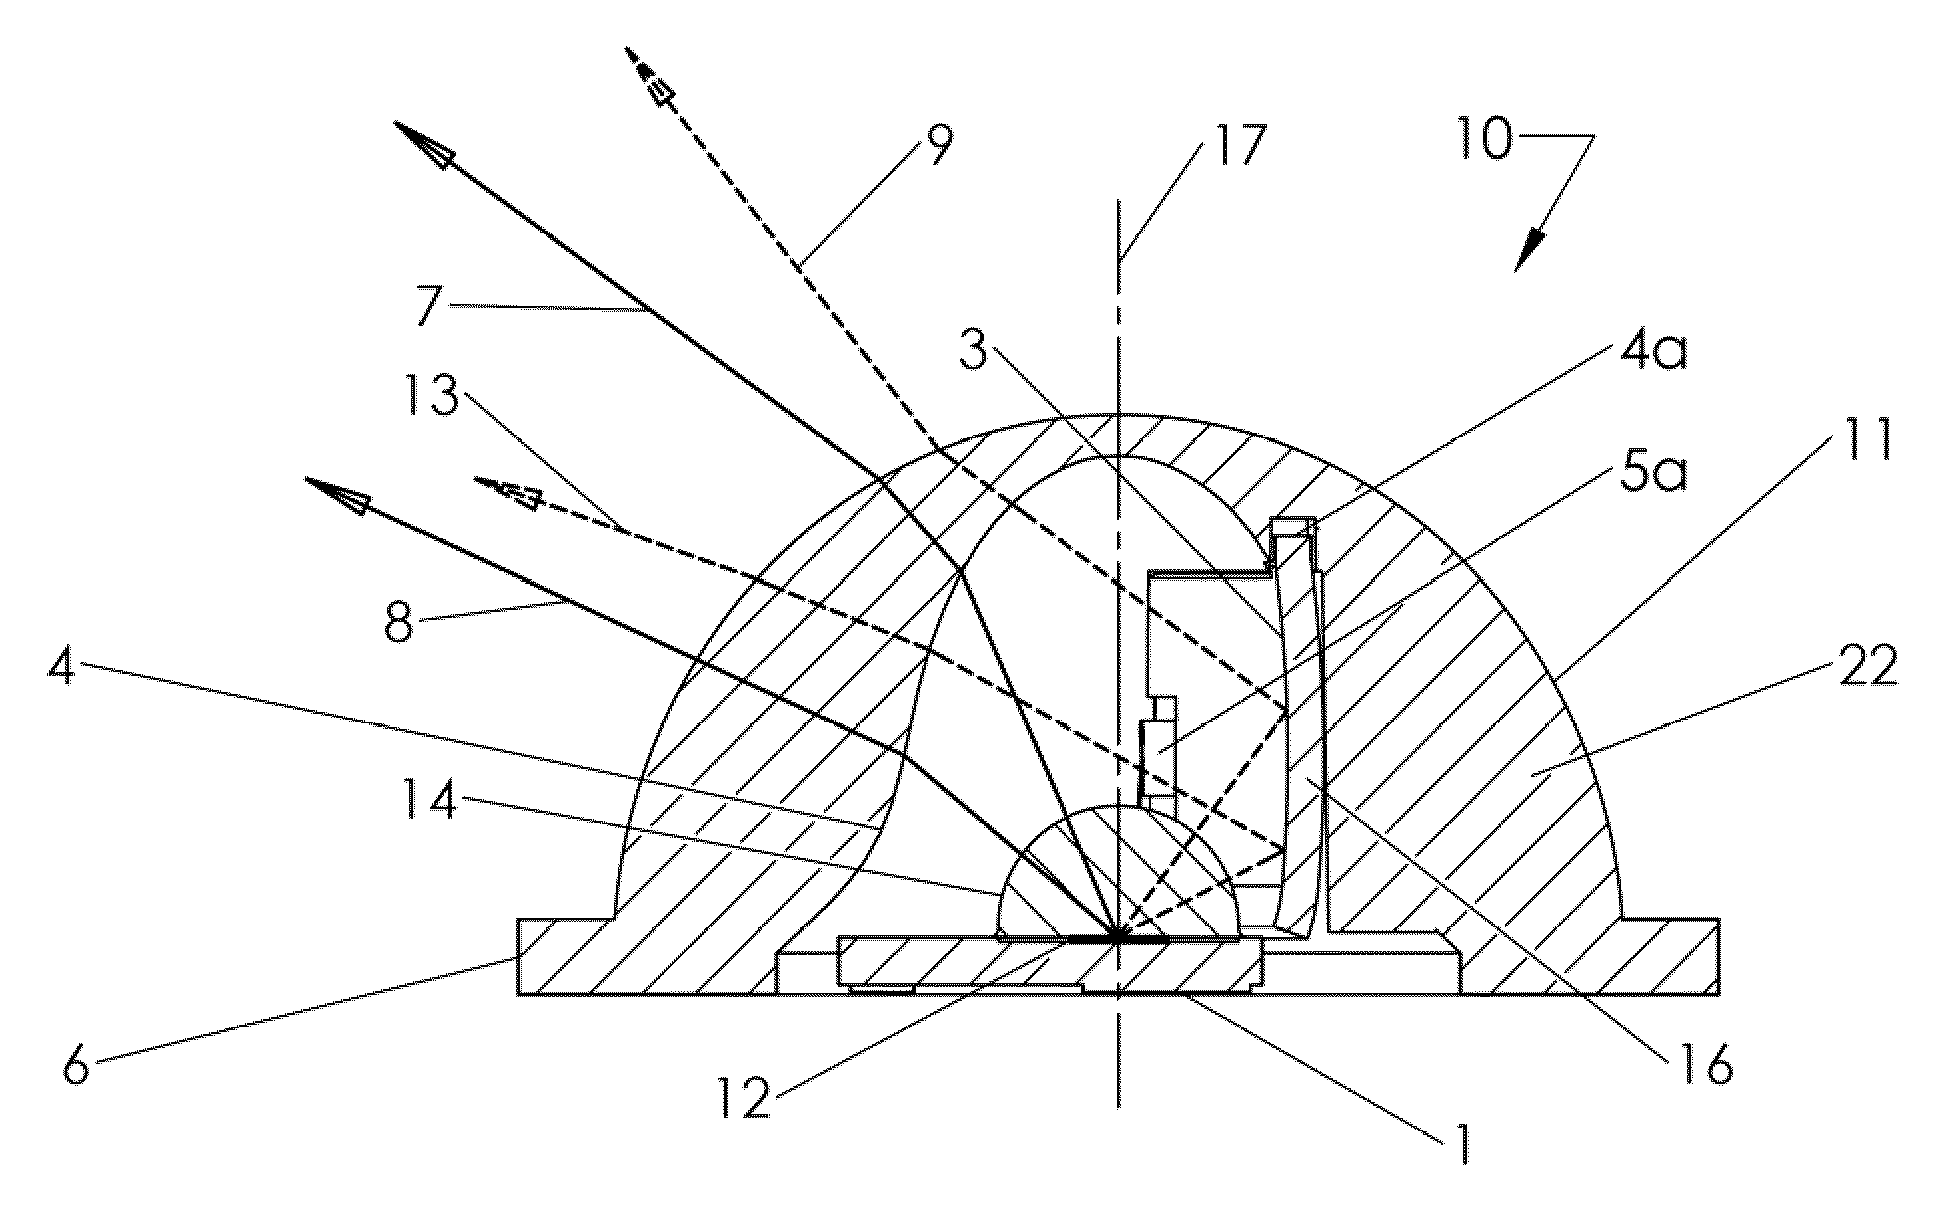 LED devices for offset wide beam generation